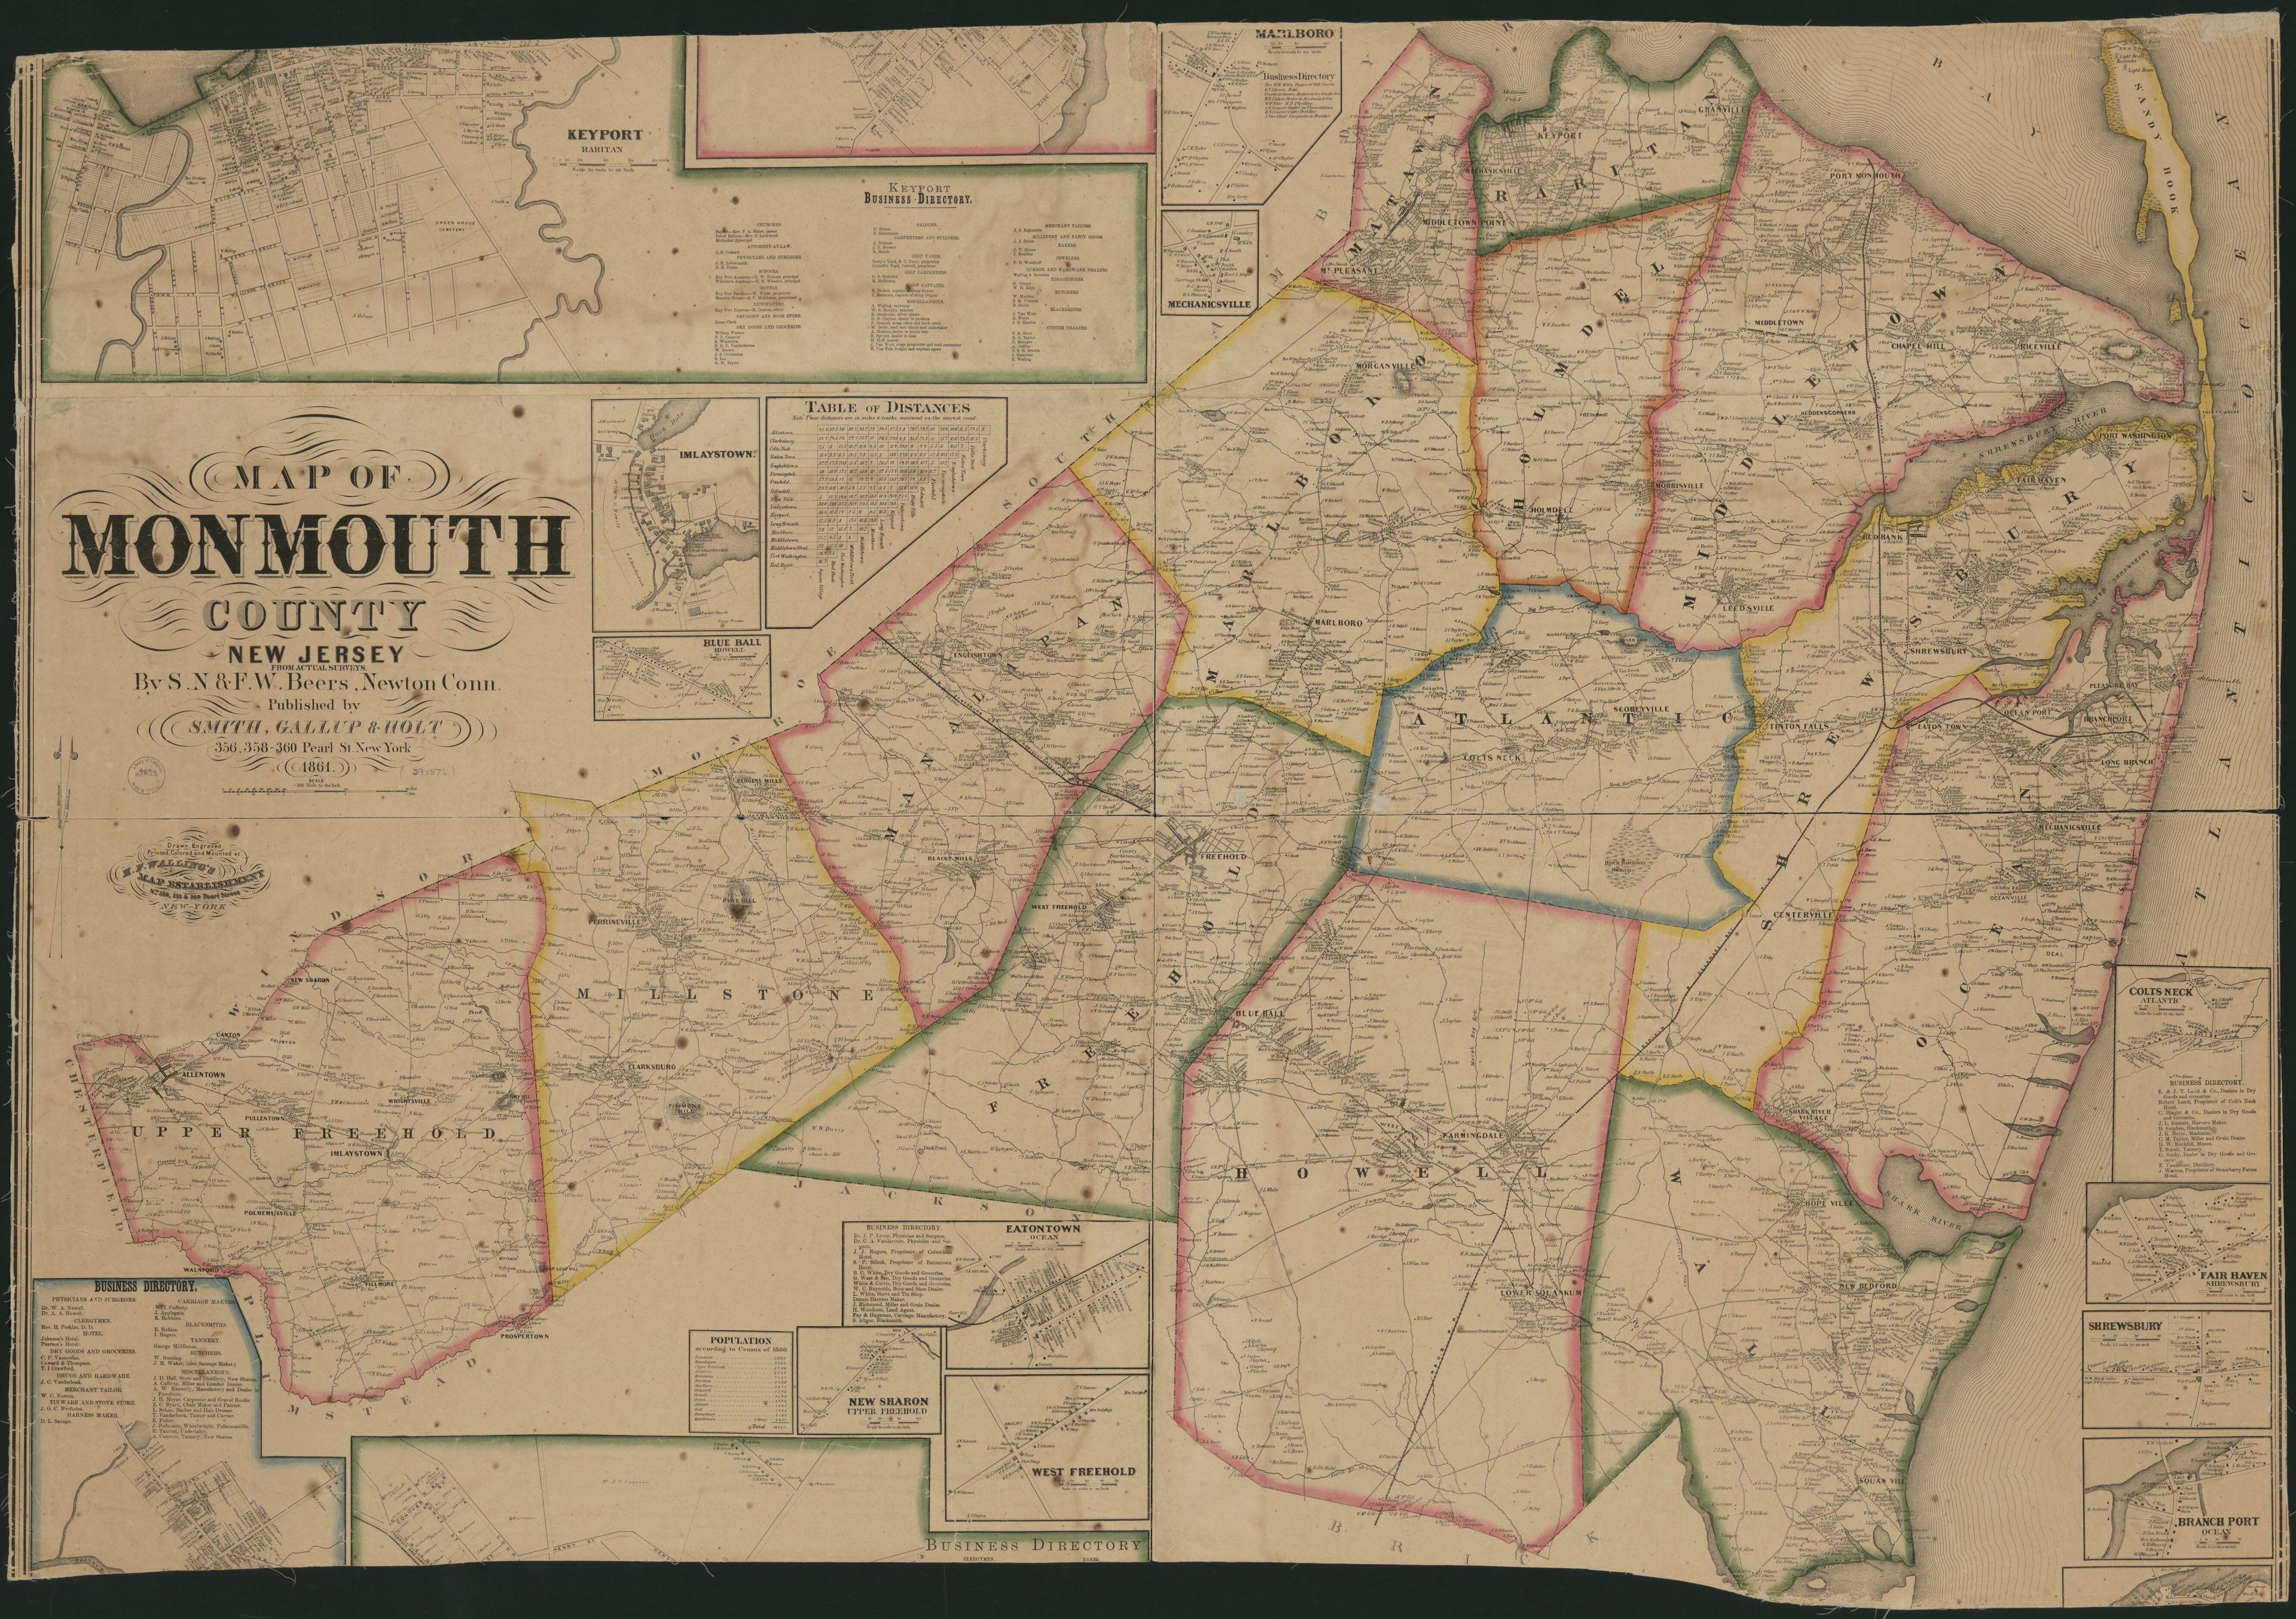 This old map of Map of Monmouth County, New Jersey : from Actual Surveys from 1861 was created by F. W. (Frederick W.) Beers, S. N. Beers,  H.F. Walling&